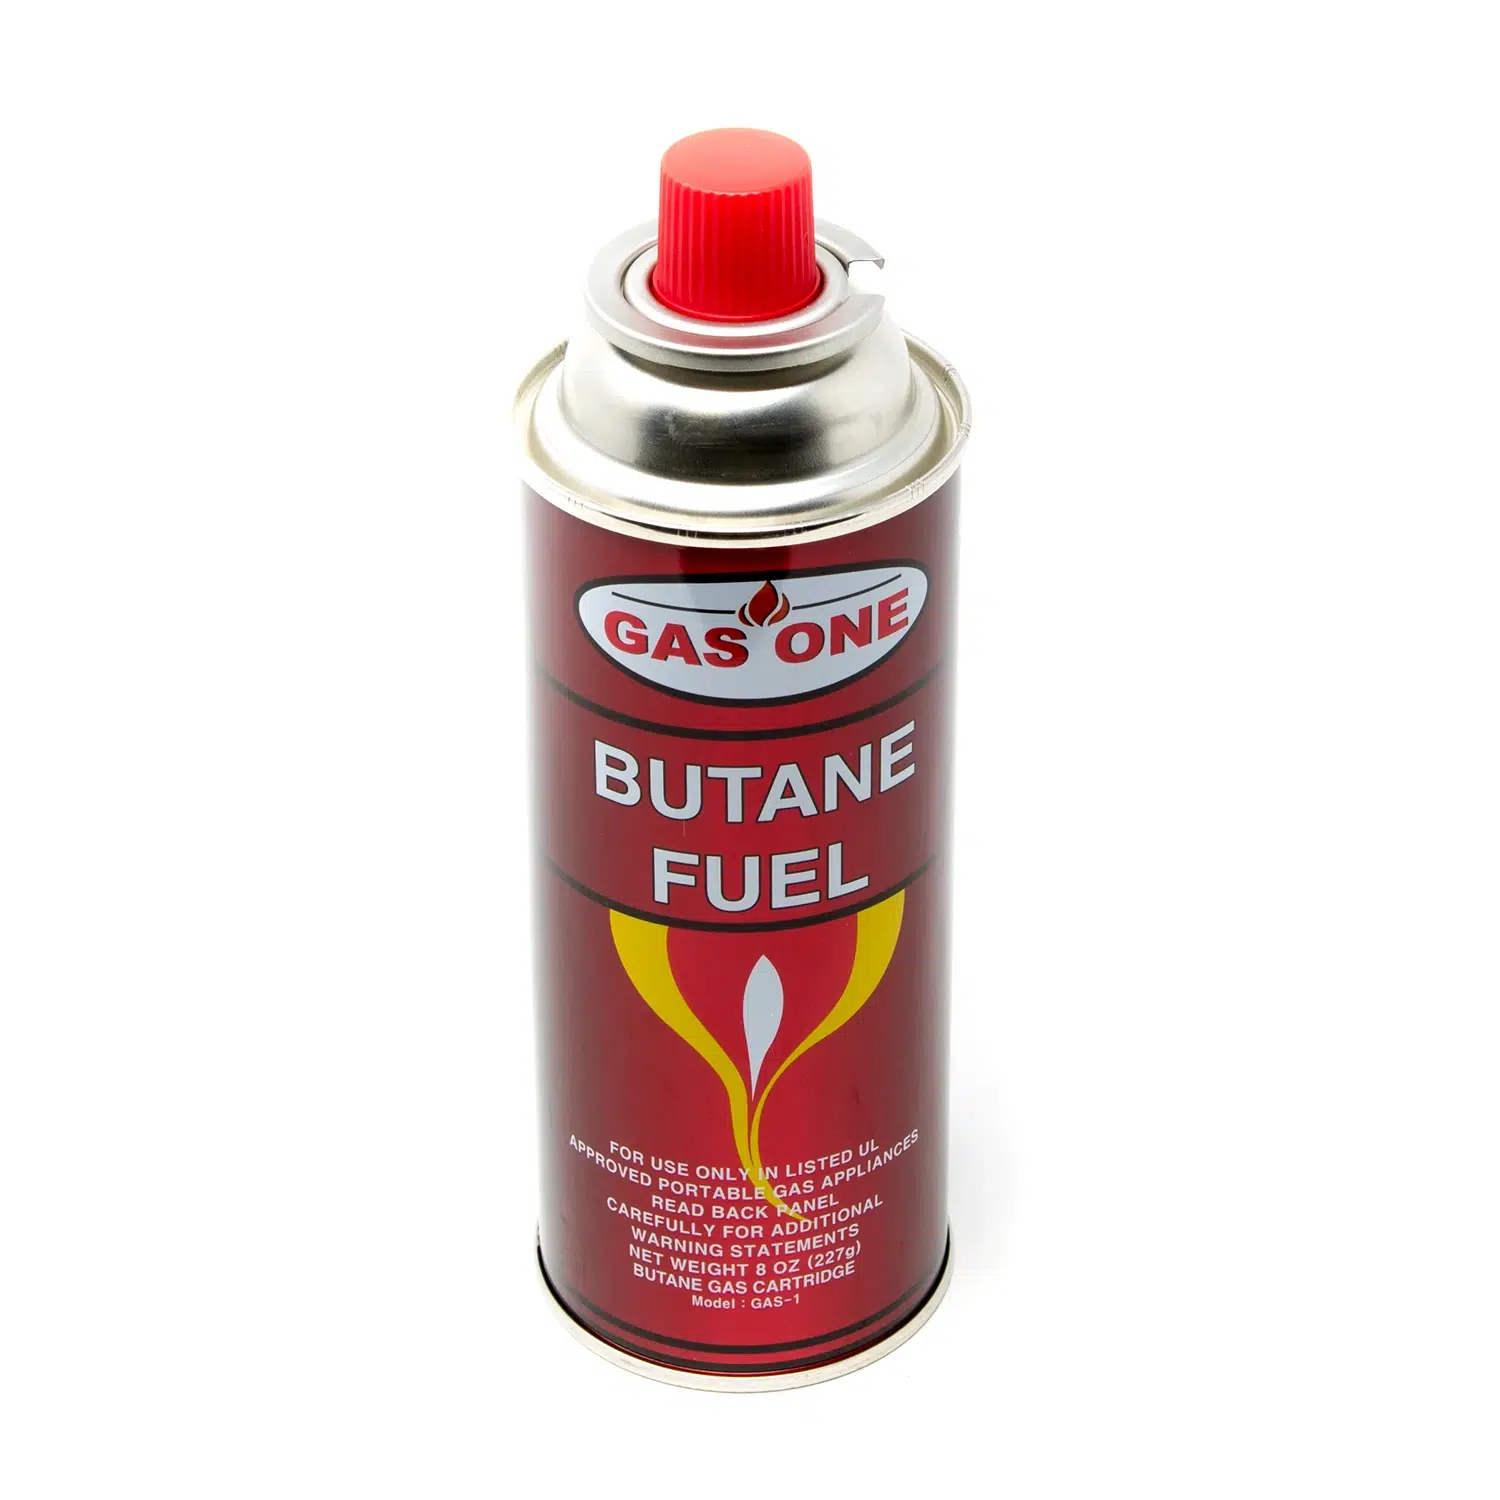 Butane fuel canister